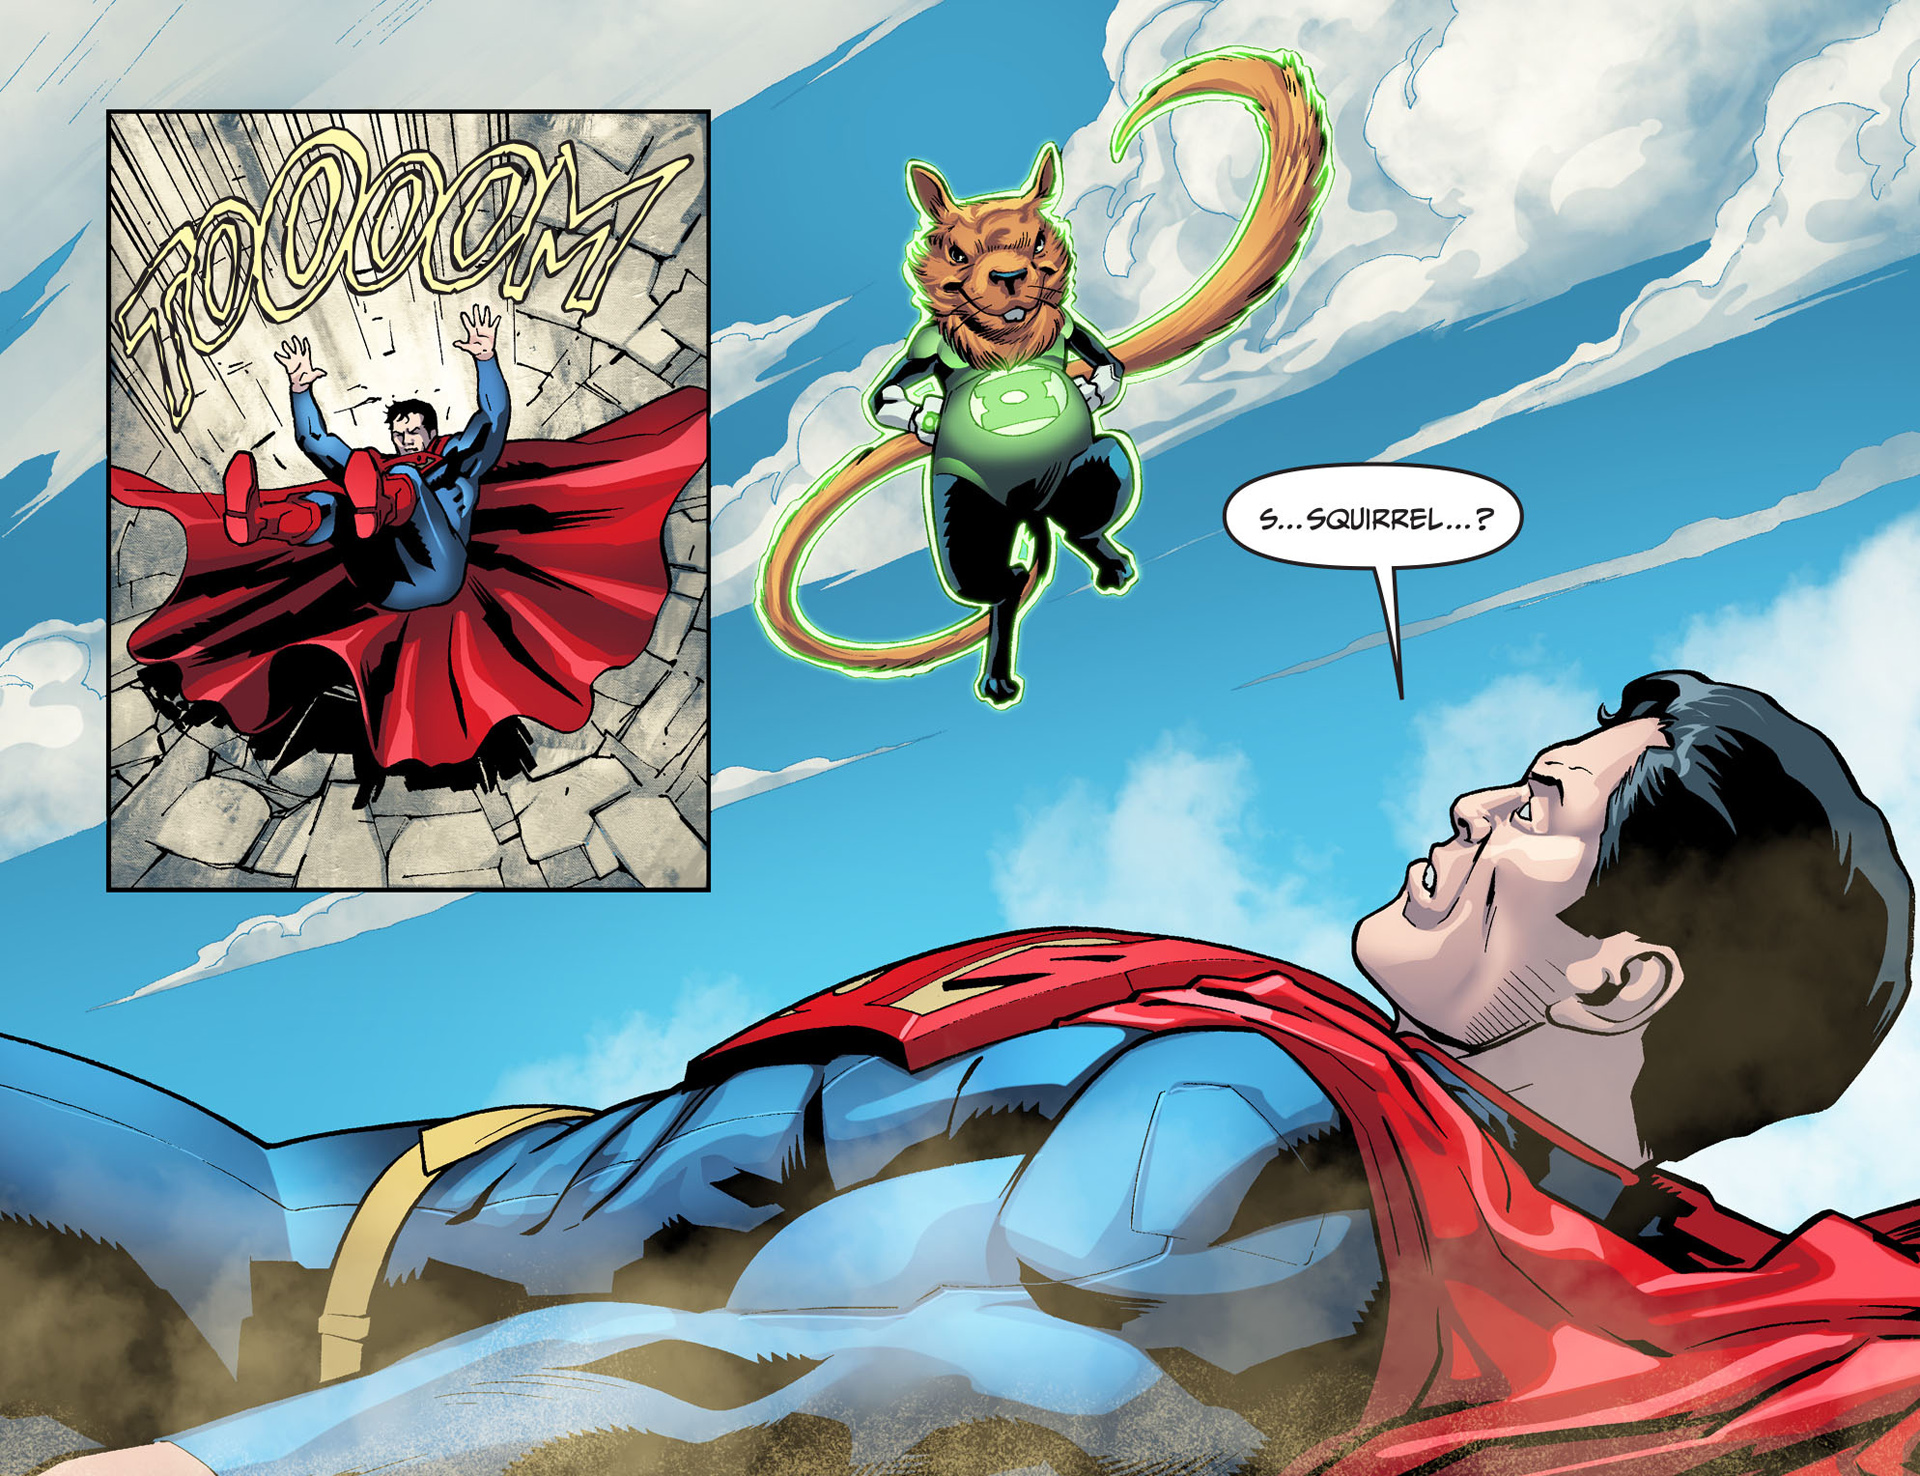 Read online Injustice: Gods Among Us: Year Two comic - Issue #10 - 9.